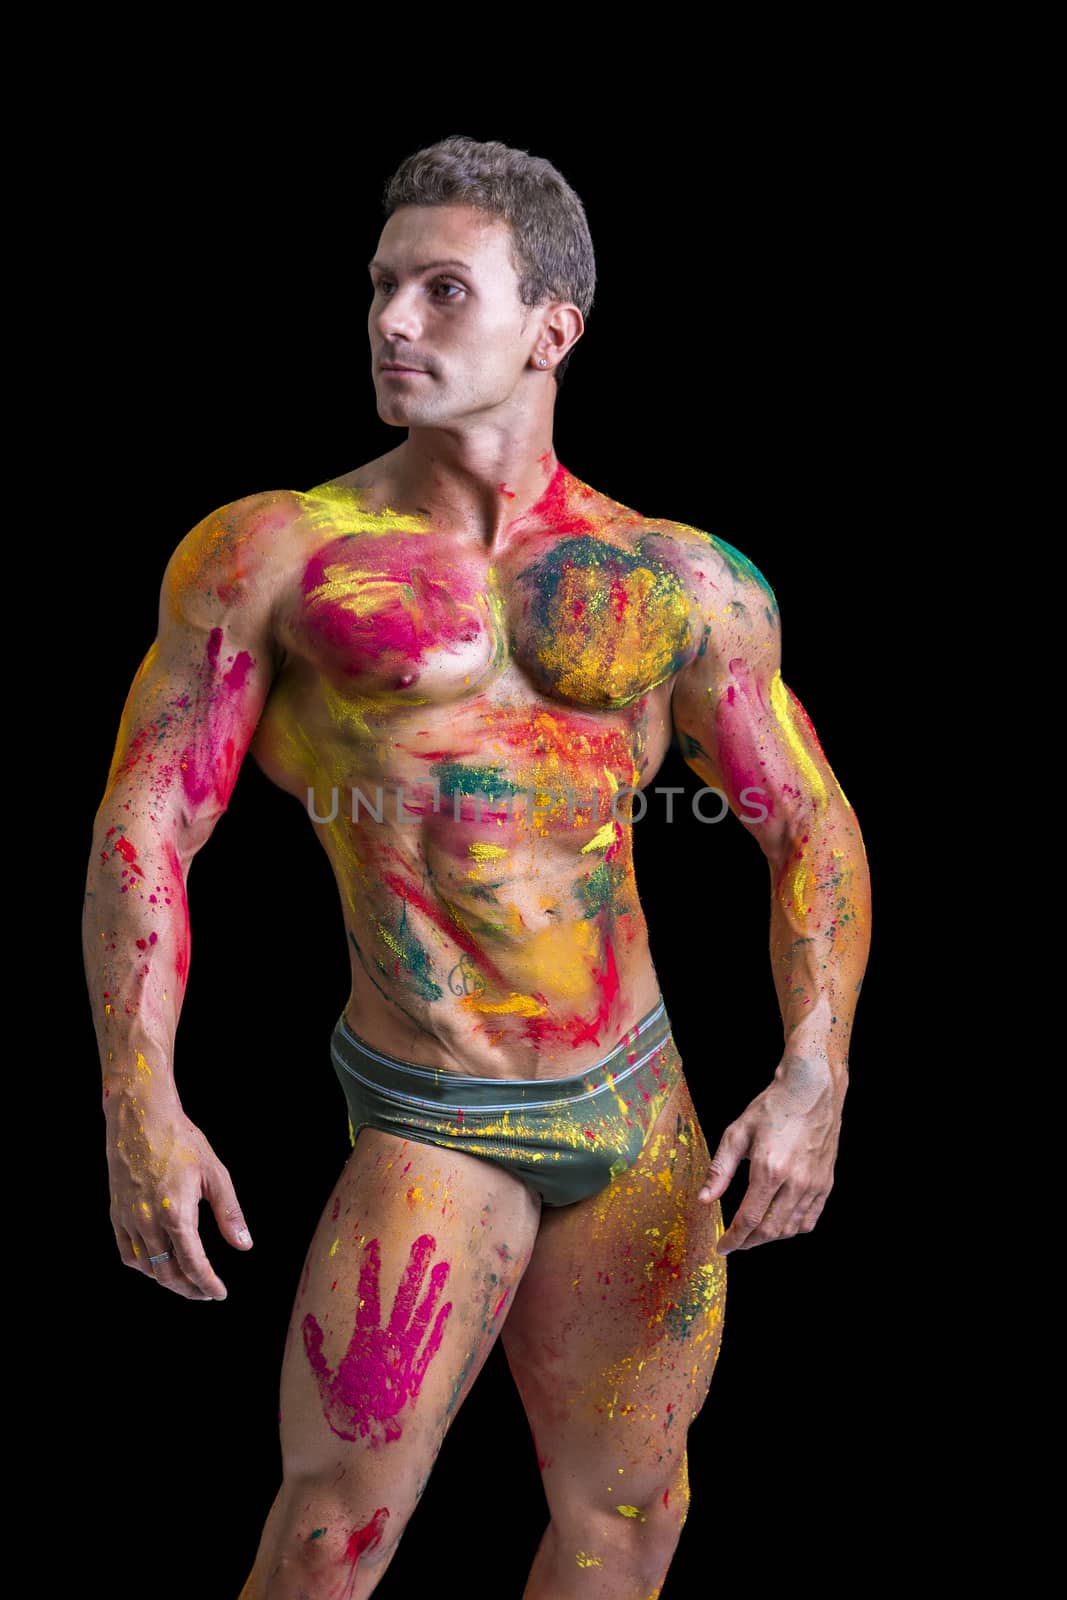 Muscular young man shirtless with skin painted with Holi colors, looking down, isolated on white